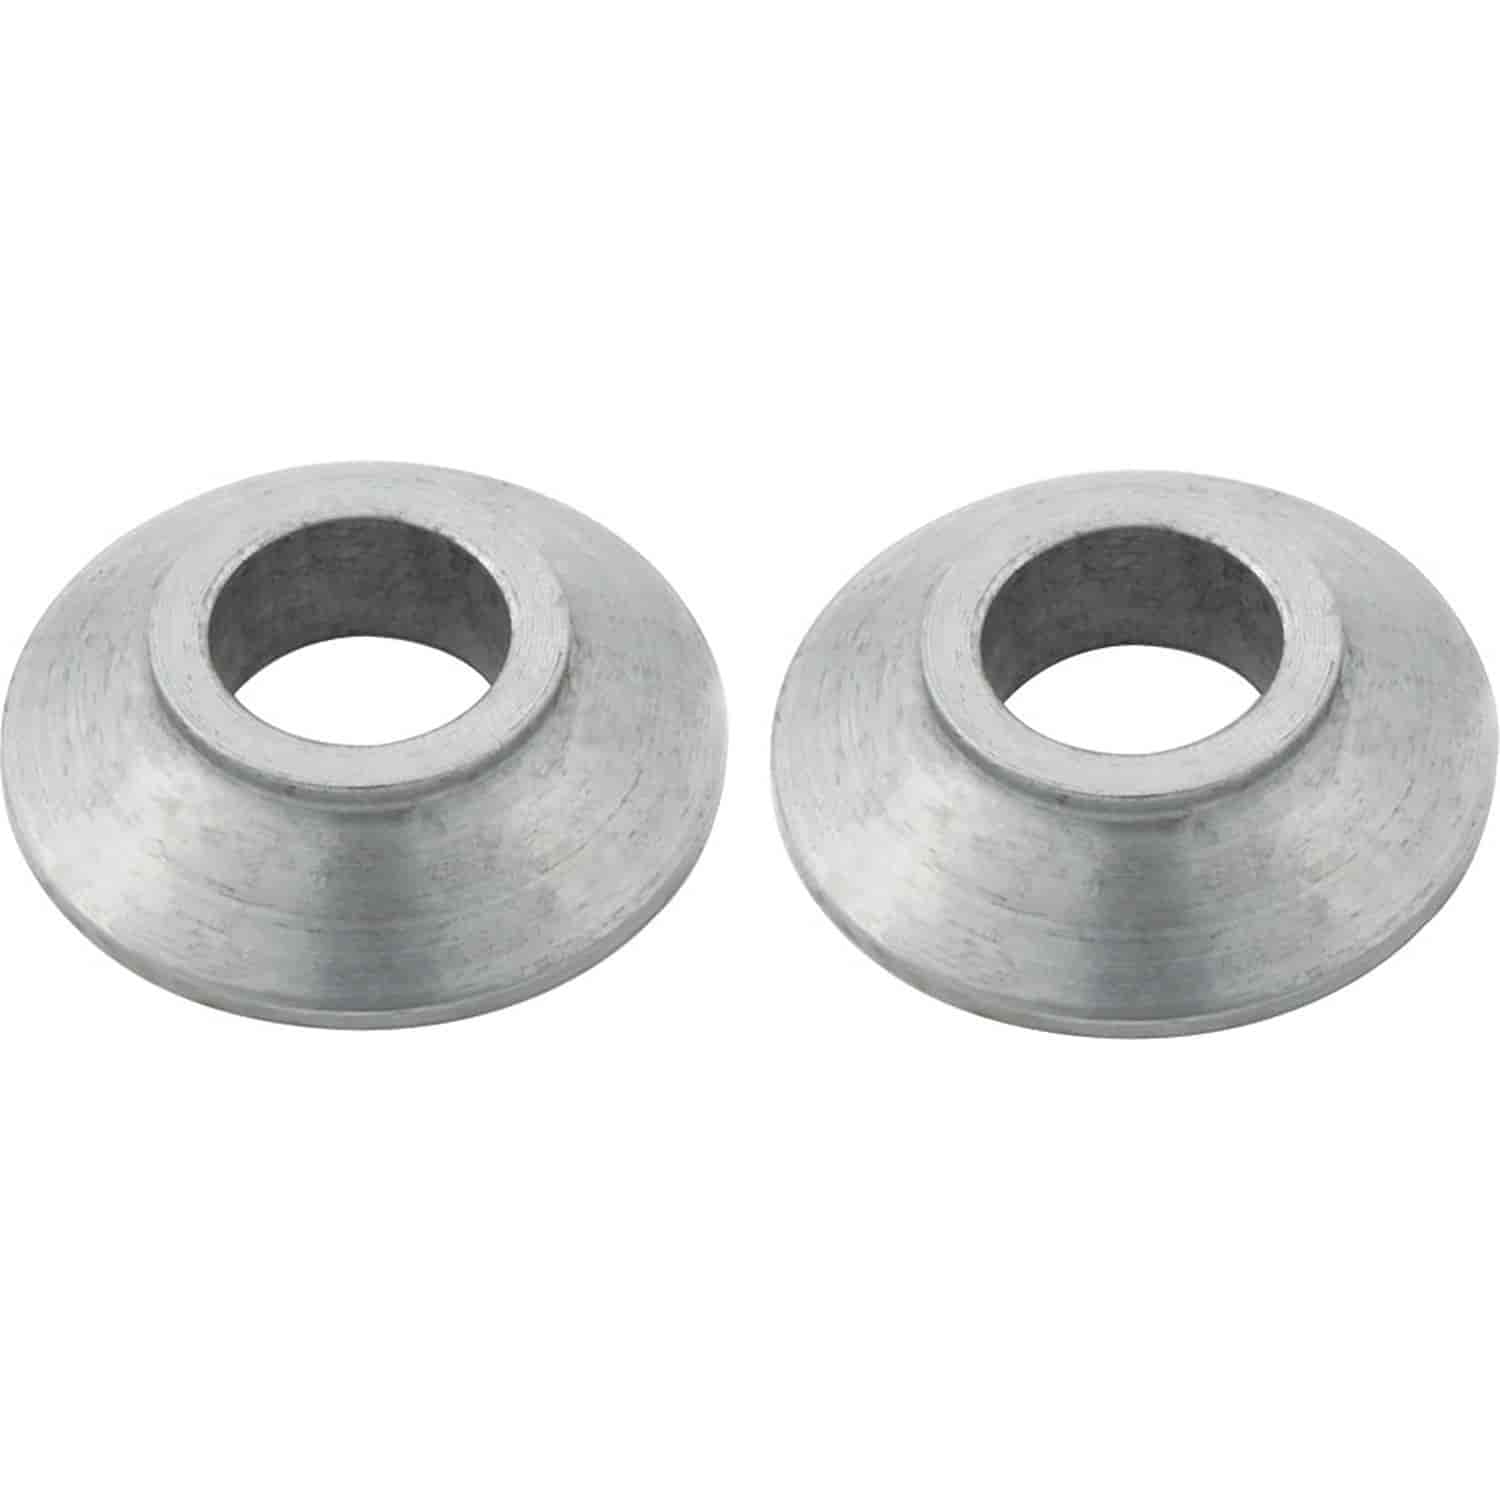 Rod End Spacers 1/2" Hole